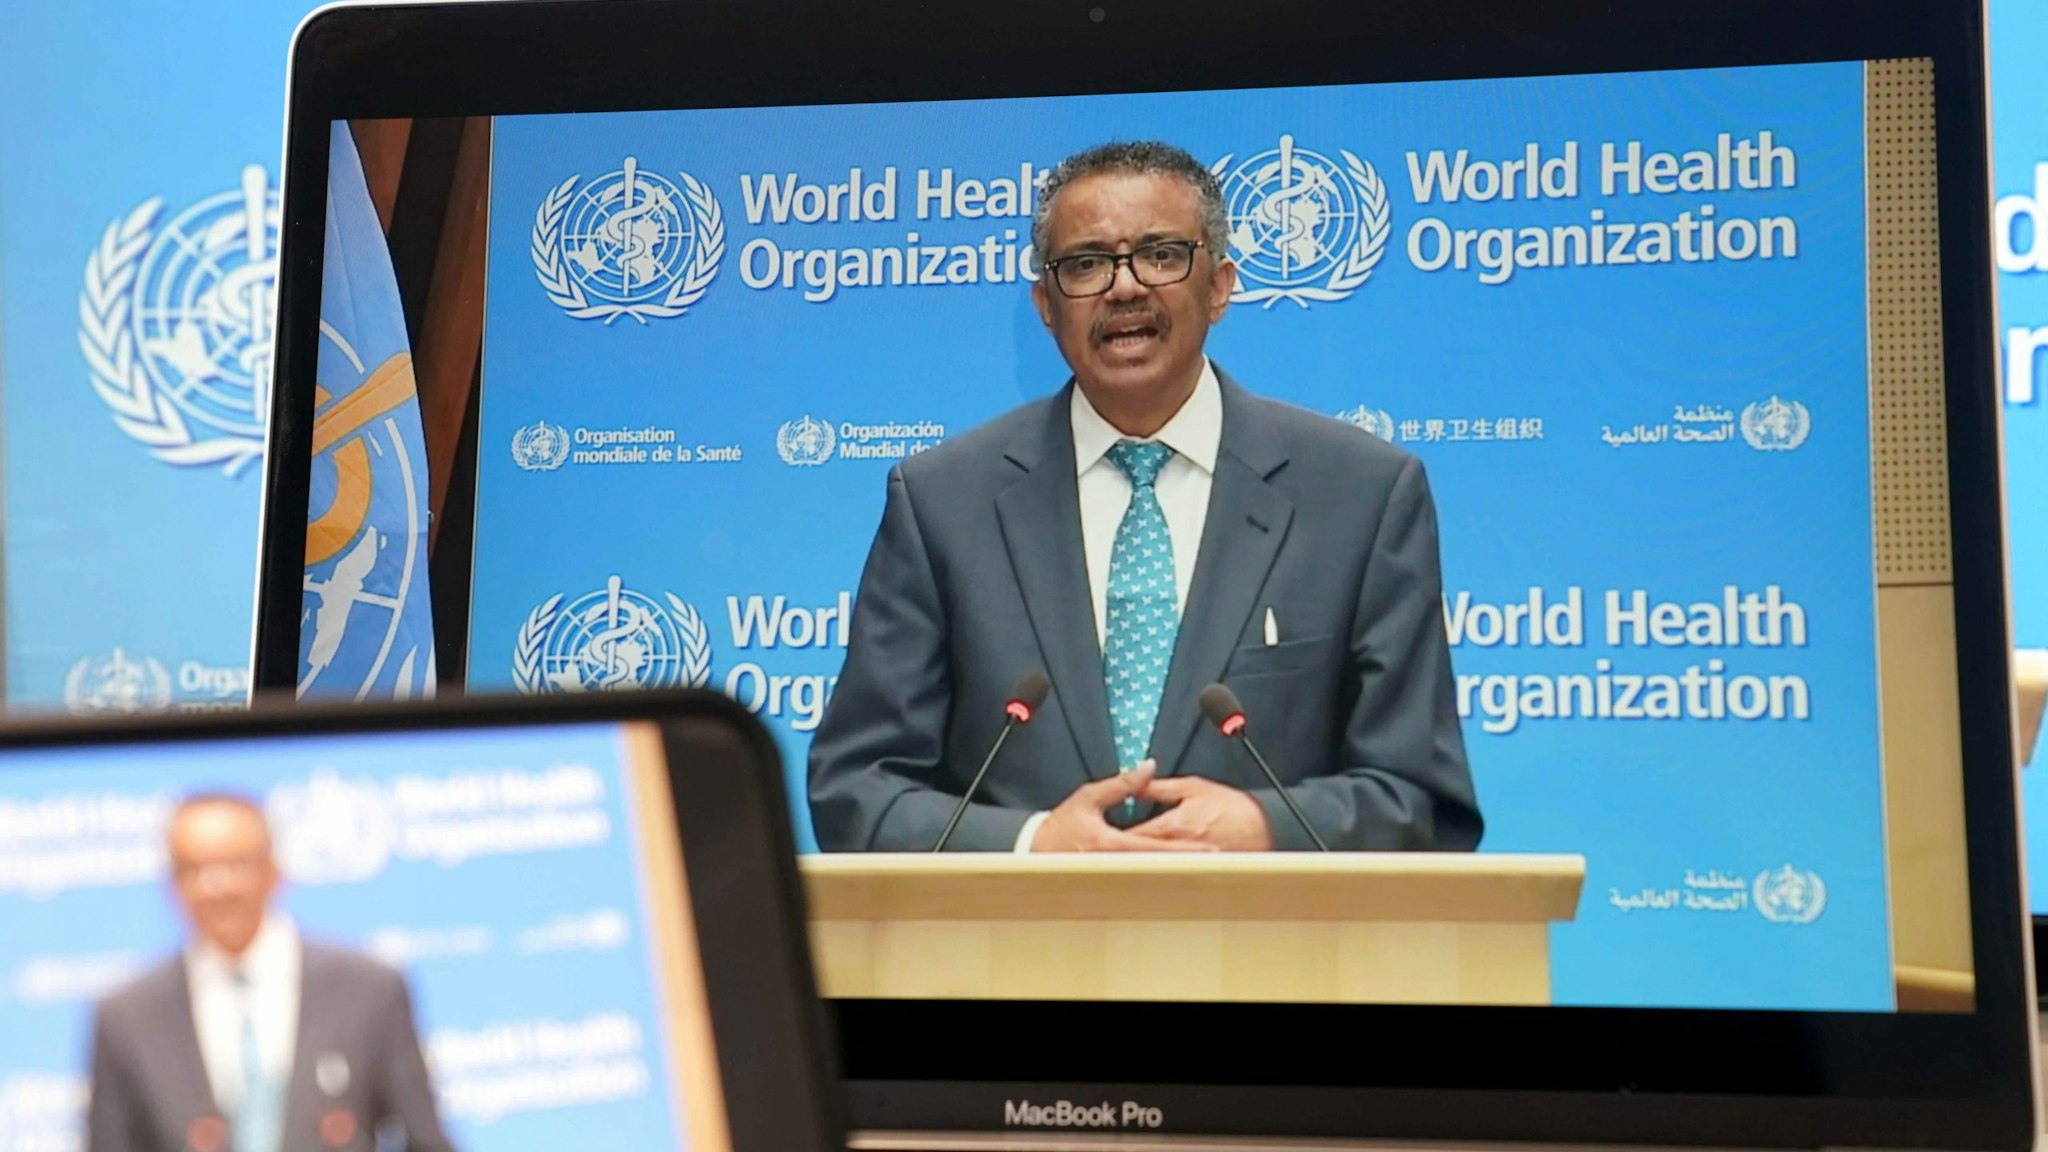 BERLIN, GERMANY - MAY 18: A screen of World Health Organization Director-General Tedros Adhanom Ghebreyesus speaking during the opening ceremony of the 73rd annual World Health Assemble via video conference on May 18, 2020 in Berlin, Germany. (Photo by Peng Dawei/China News Service via Getty Images)BERLIN, GERMANY - MAY 18: A screen of World Health Organization Director-General Tedros Adhanom Ghebreyesus speaking during the opening ceremony of the 73rd annual World Health Assemble via video conference on May 18, 2020 in Berlin, Germany. (Photo by Peng Dawei/China News Service via Getty Images)